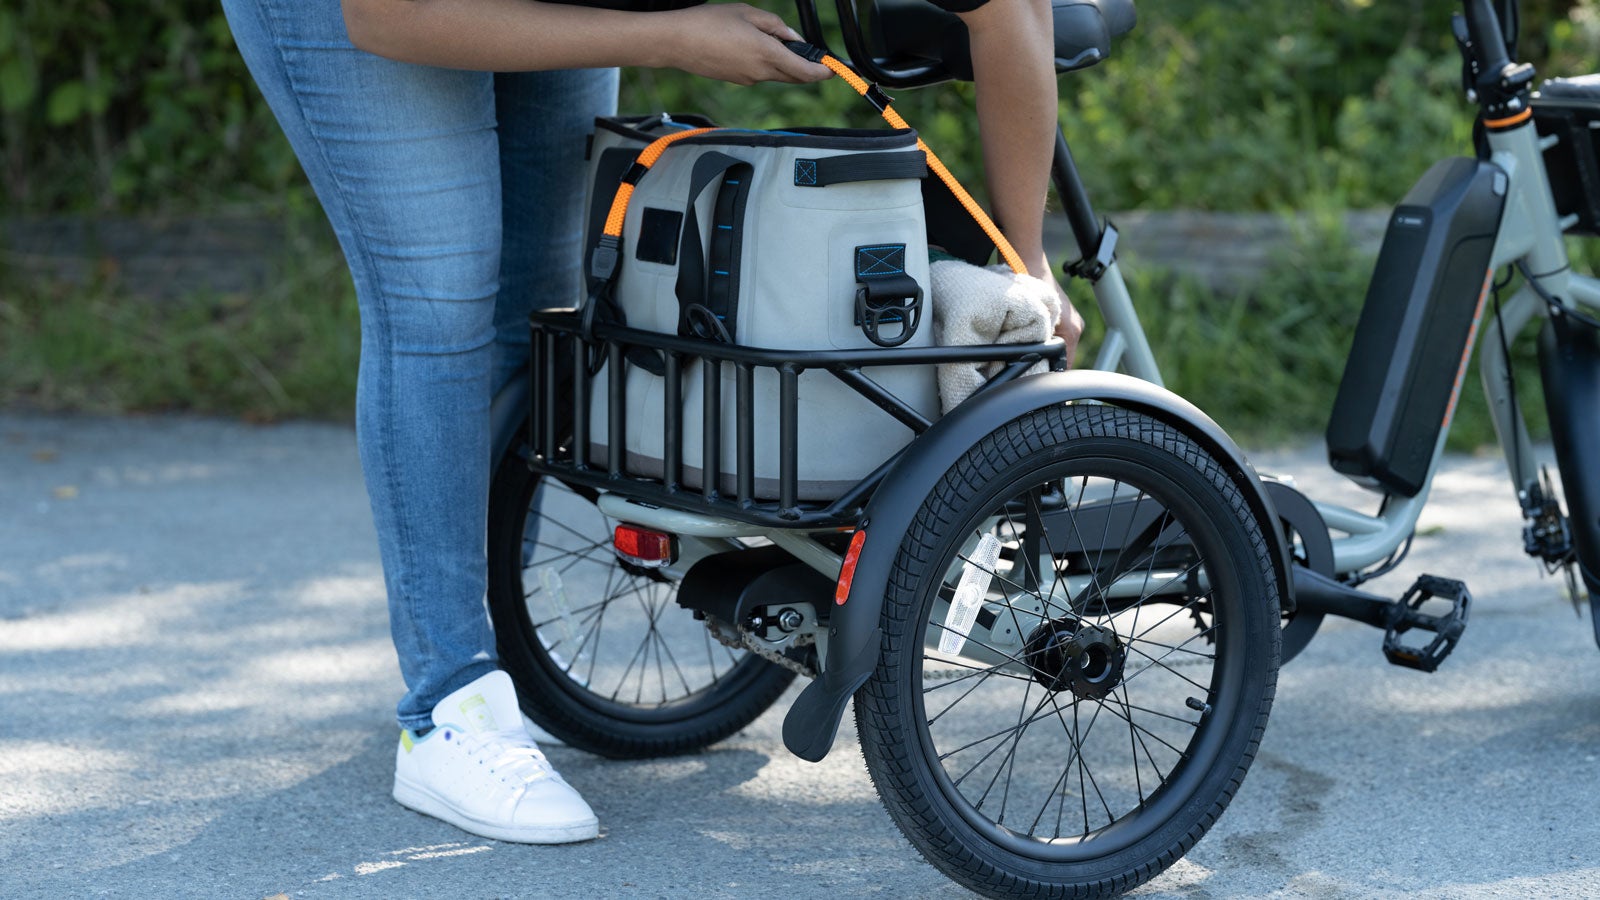 The RadTrike is a Three-Wheeled E-Bike That Wants to Replace Your Ute